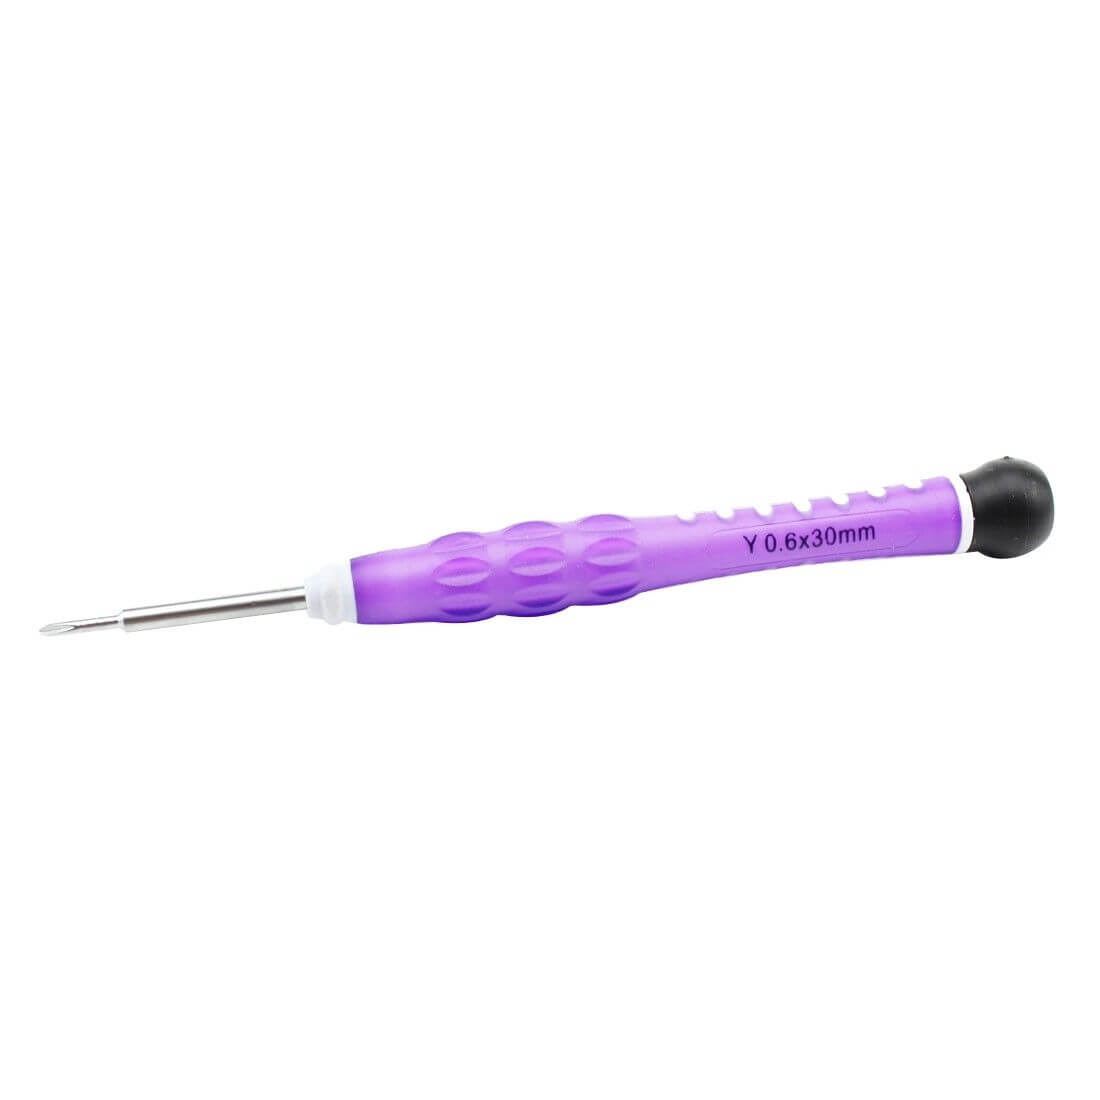 Tri-point 0.6 x 30mm Repair Screwdriver for iPhone 7 & 7 Plus & Apple Watch